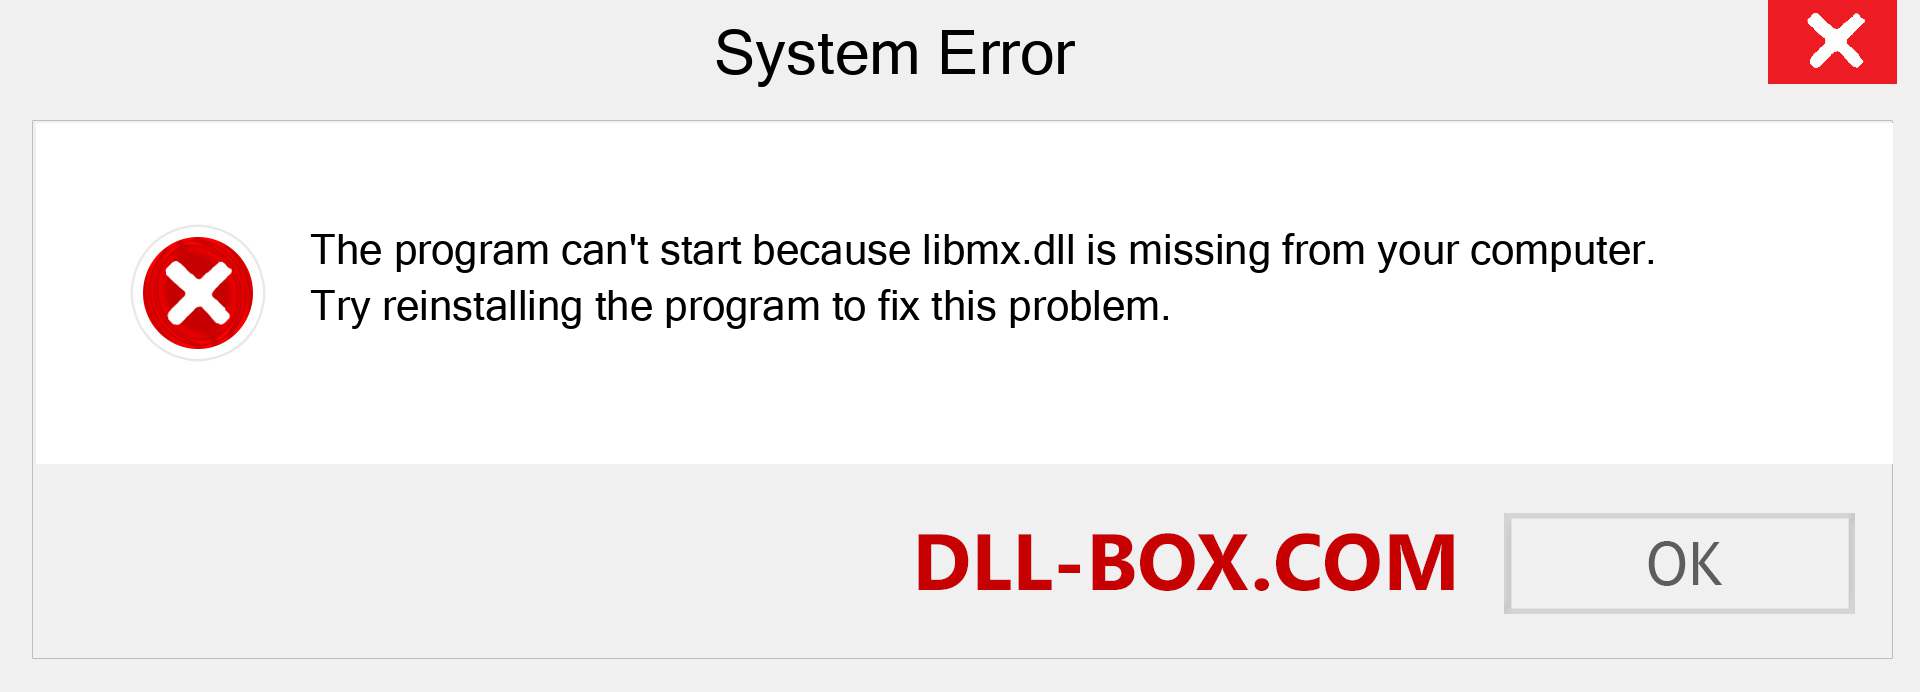  libmx.dll file is missing?. Download for Windows 7, 8, 10 - Fix  libmx dll Missing Error on Windows, photos, images